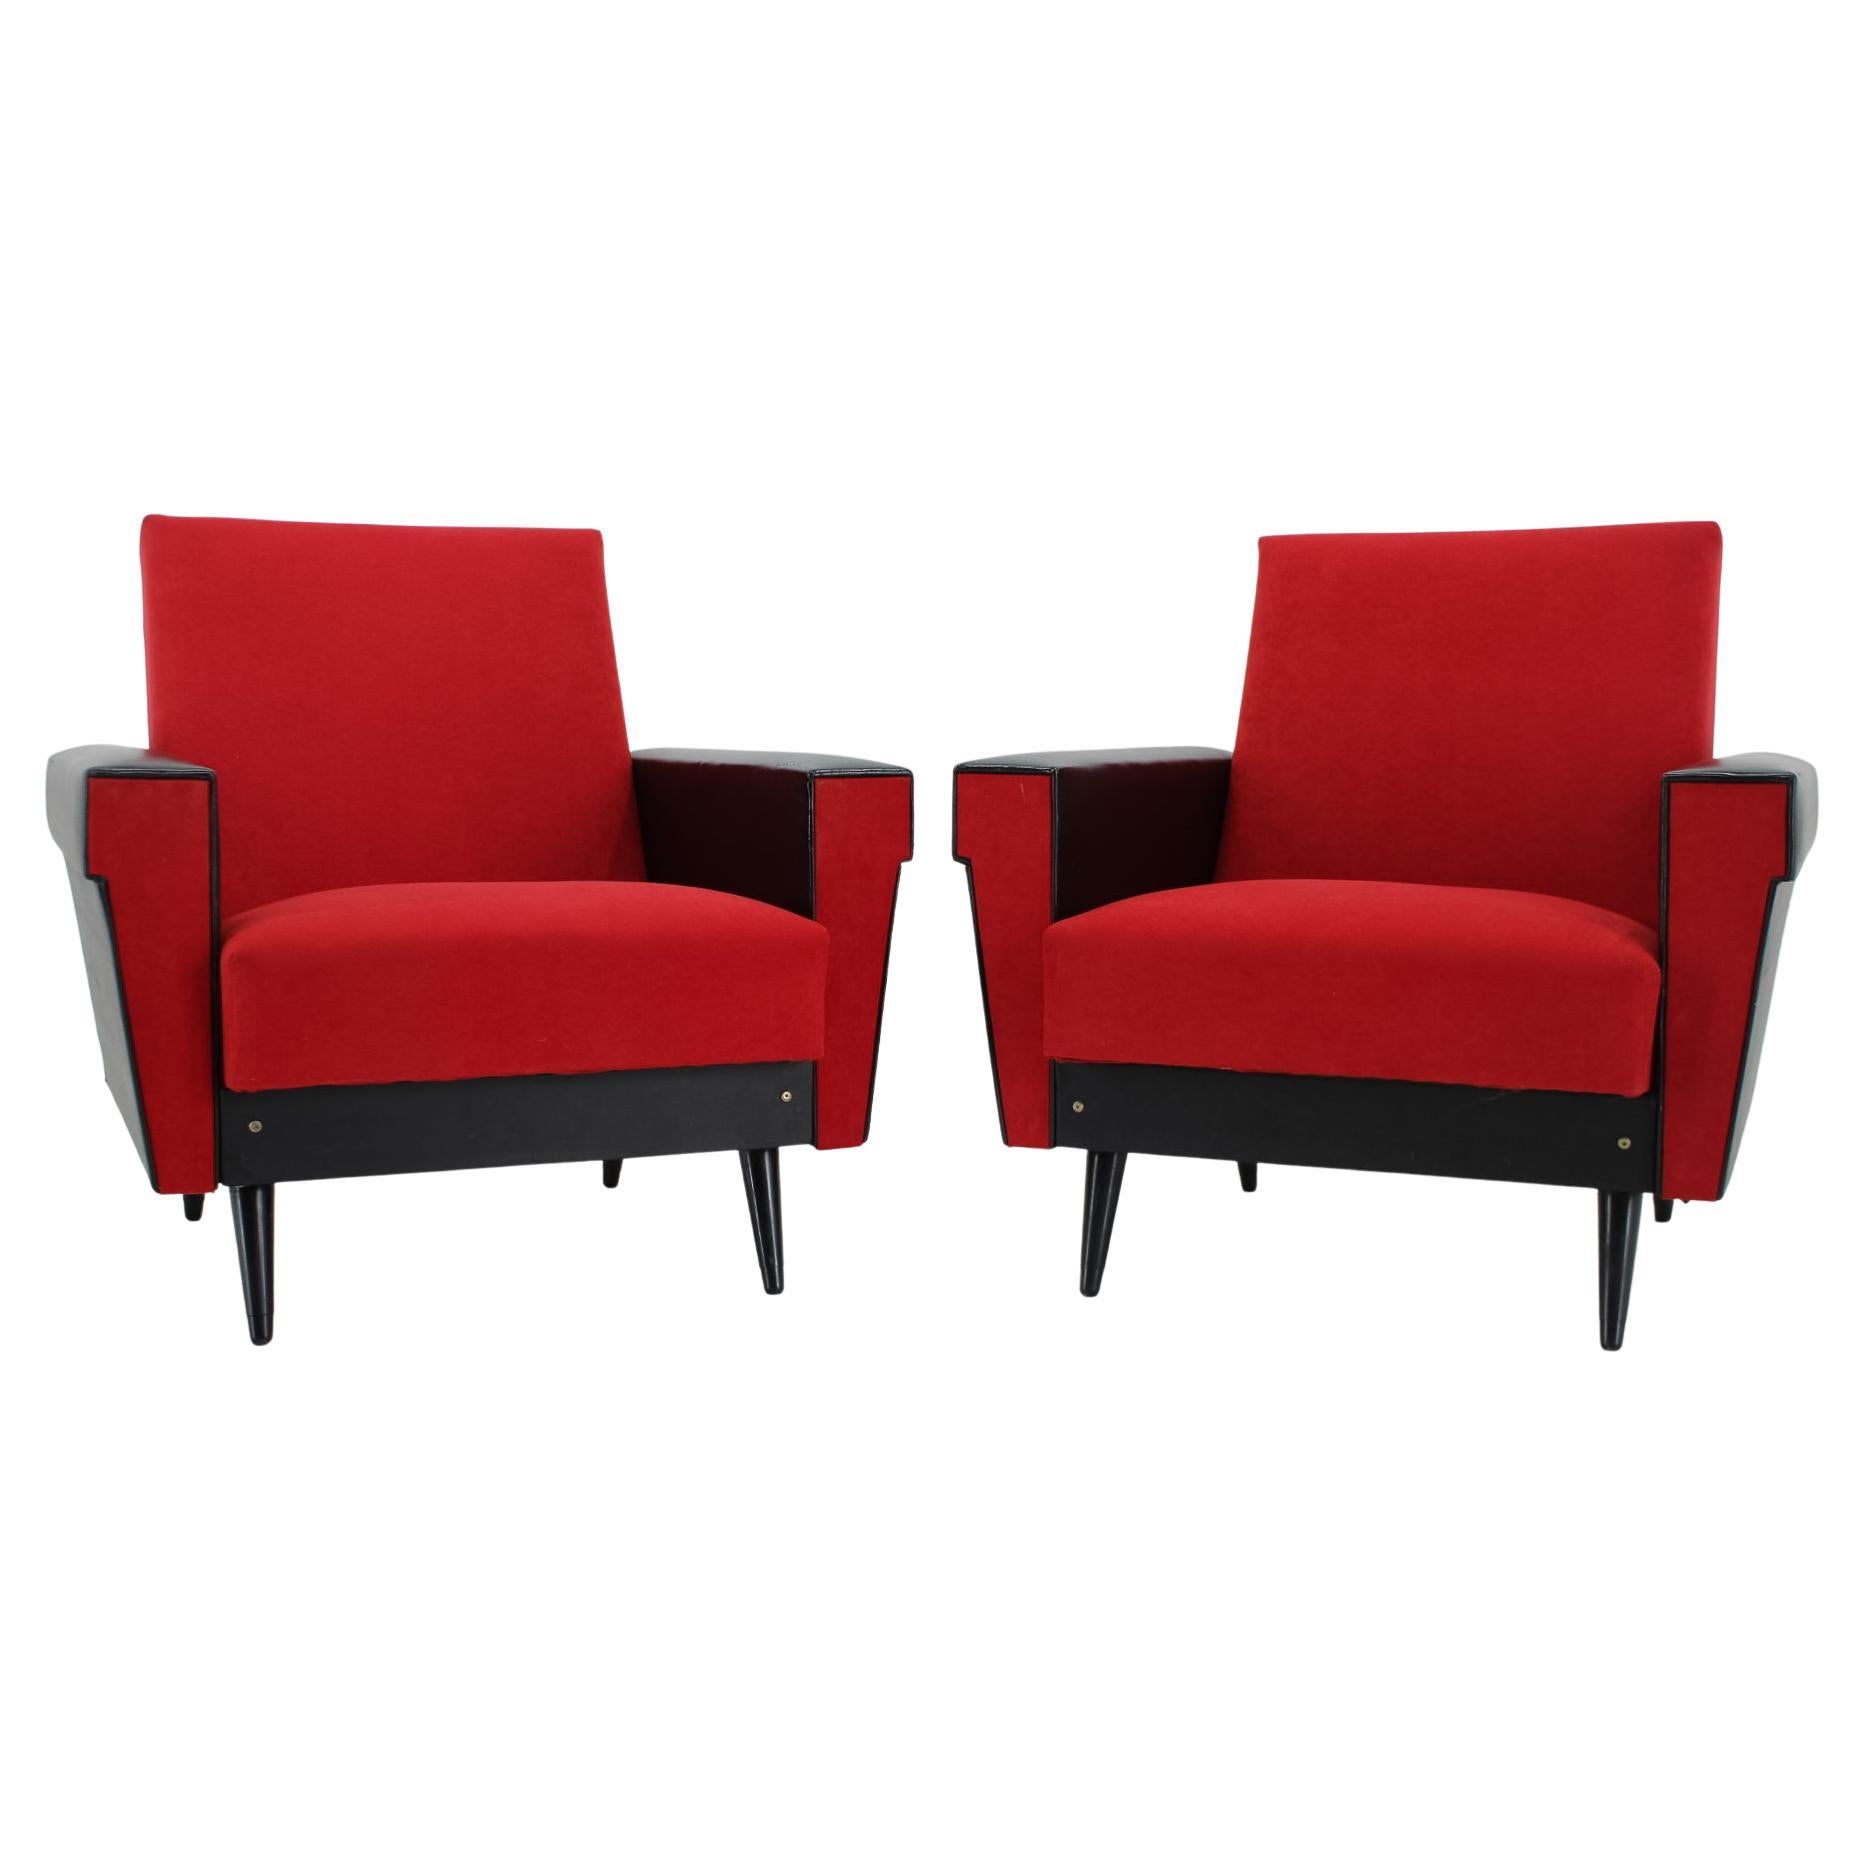 1970's Pair of Leatherette and Red Fabric Armchairs, Czechoslovakia For Sale